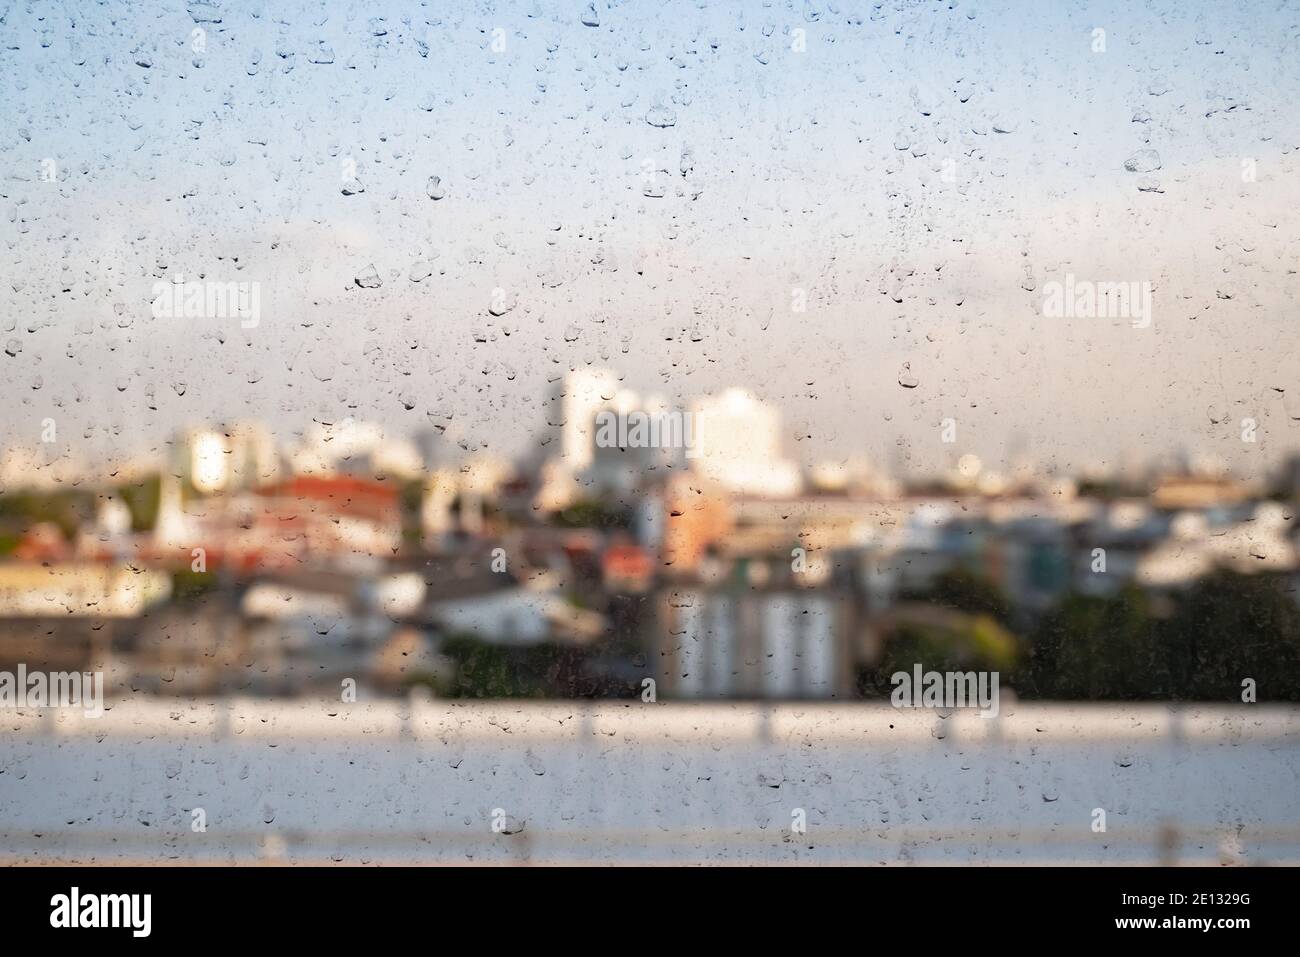 Rain and dust stain on the window glass Stock Photo